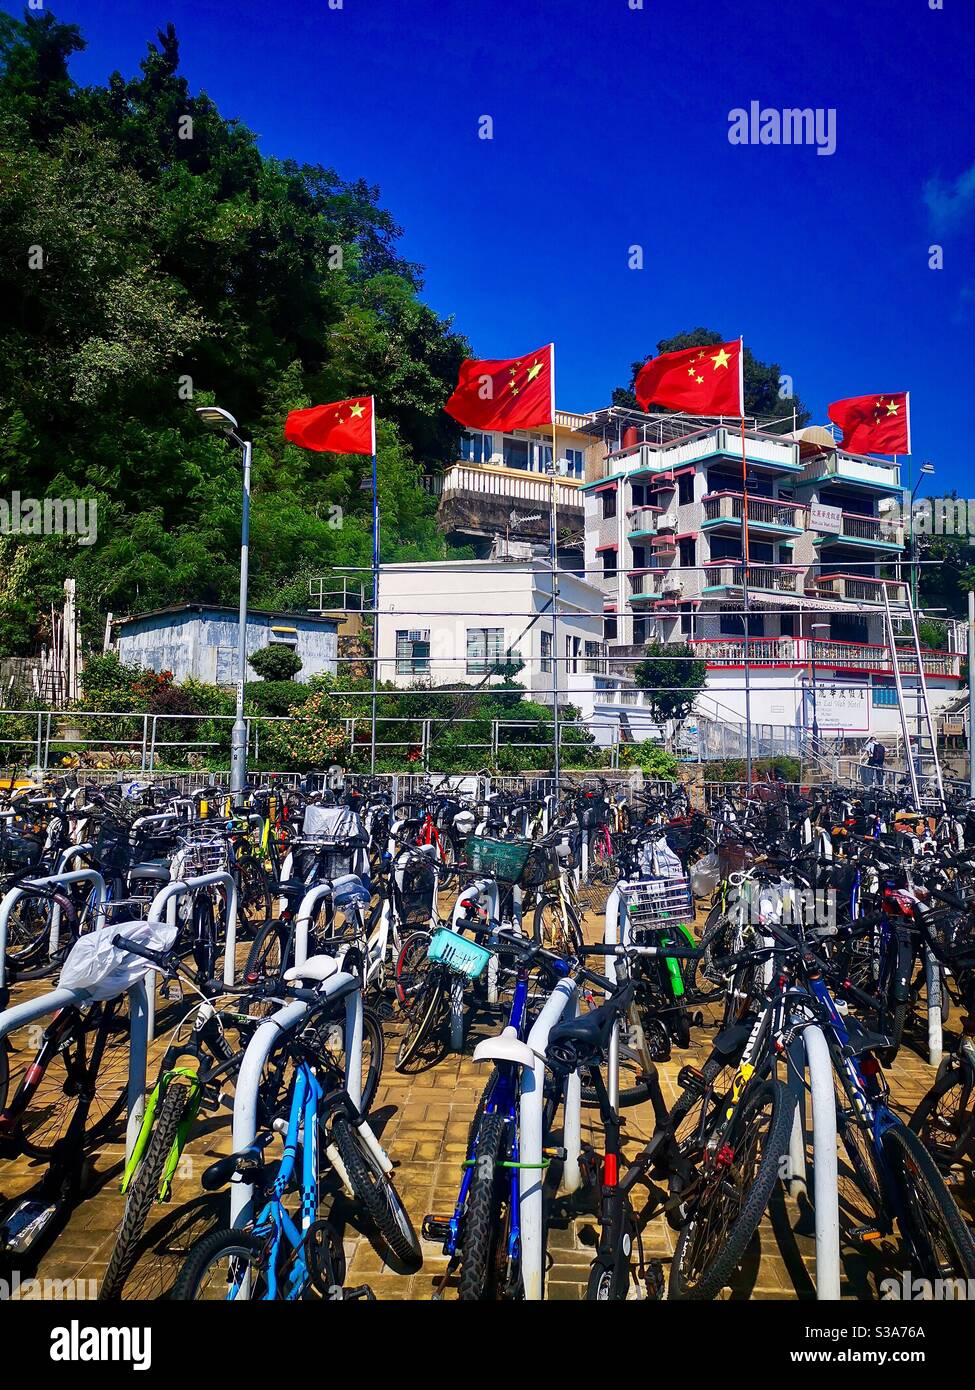 Chinese flags flying high in Lamma Island in Hong Kong during China’s national day celebrations. Stock Photo